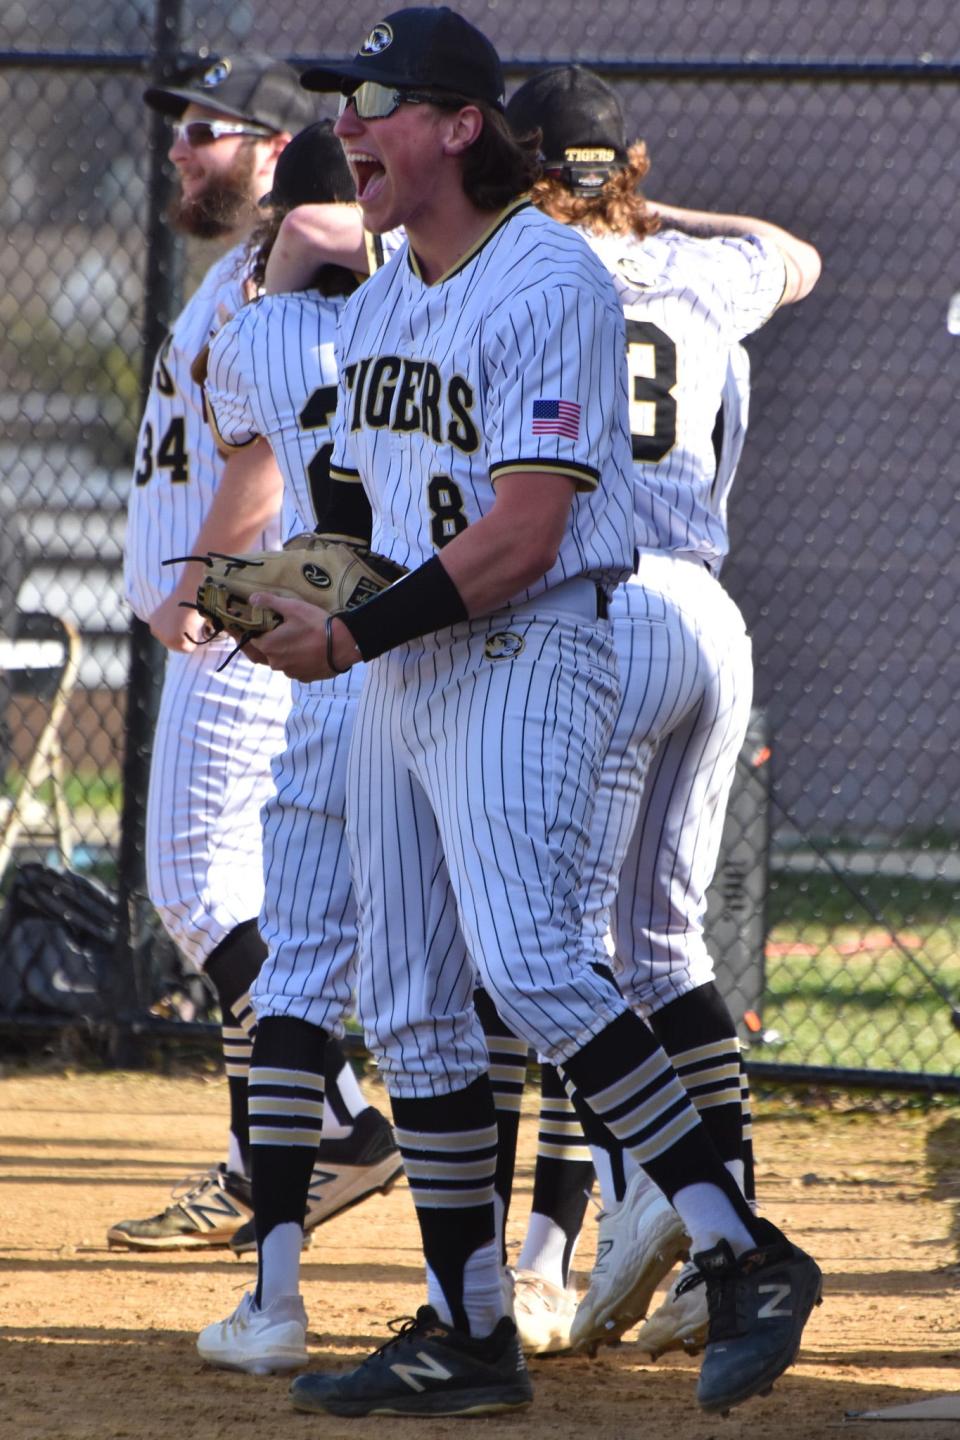 Harry S. Truman senior Andrew Armstrong celebrates during the Tigers' five-run seventh inning in a 6-4 victory over Archbishop Wood.